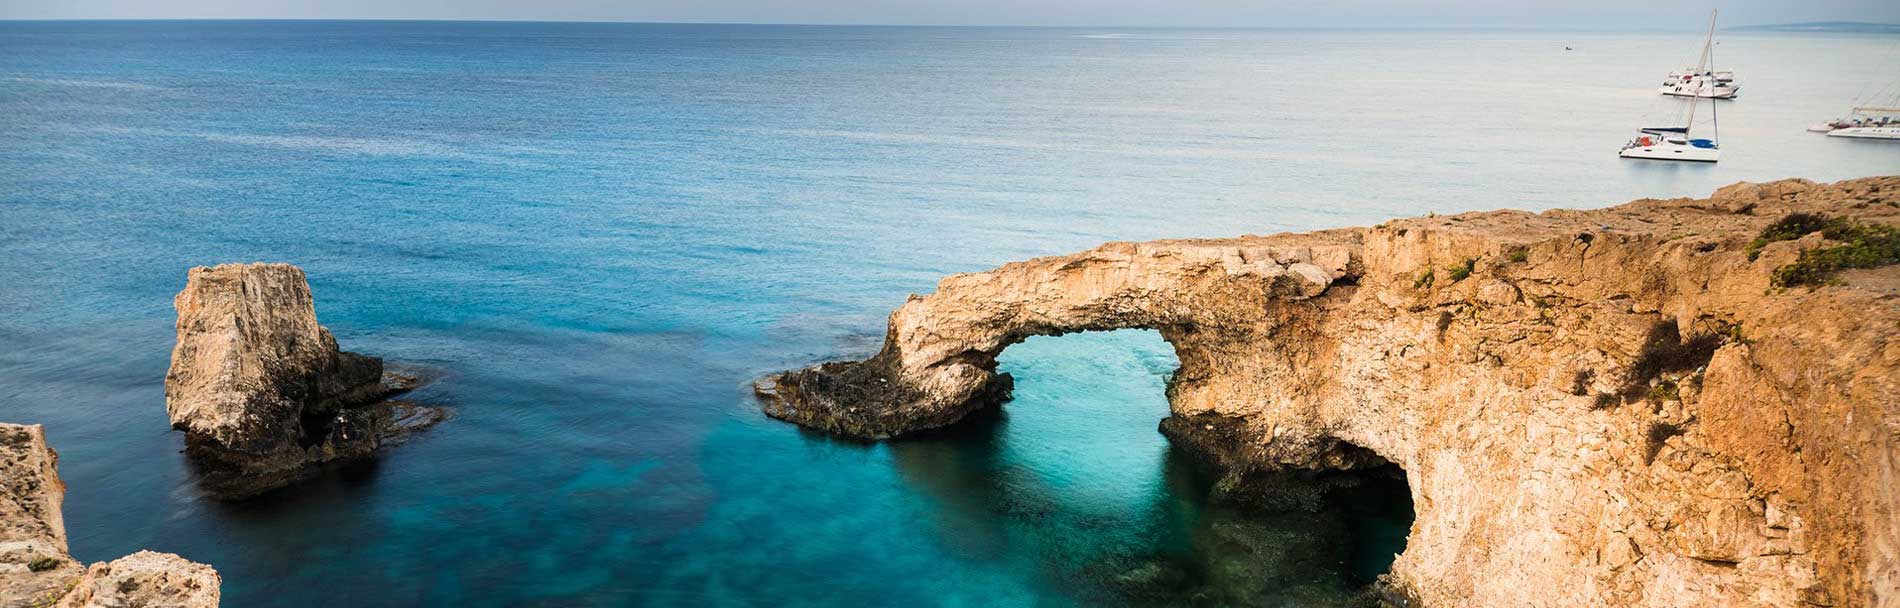 Most Popular Cyprus Tour Packages